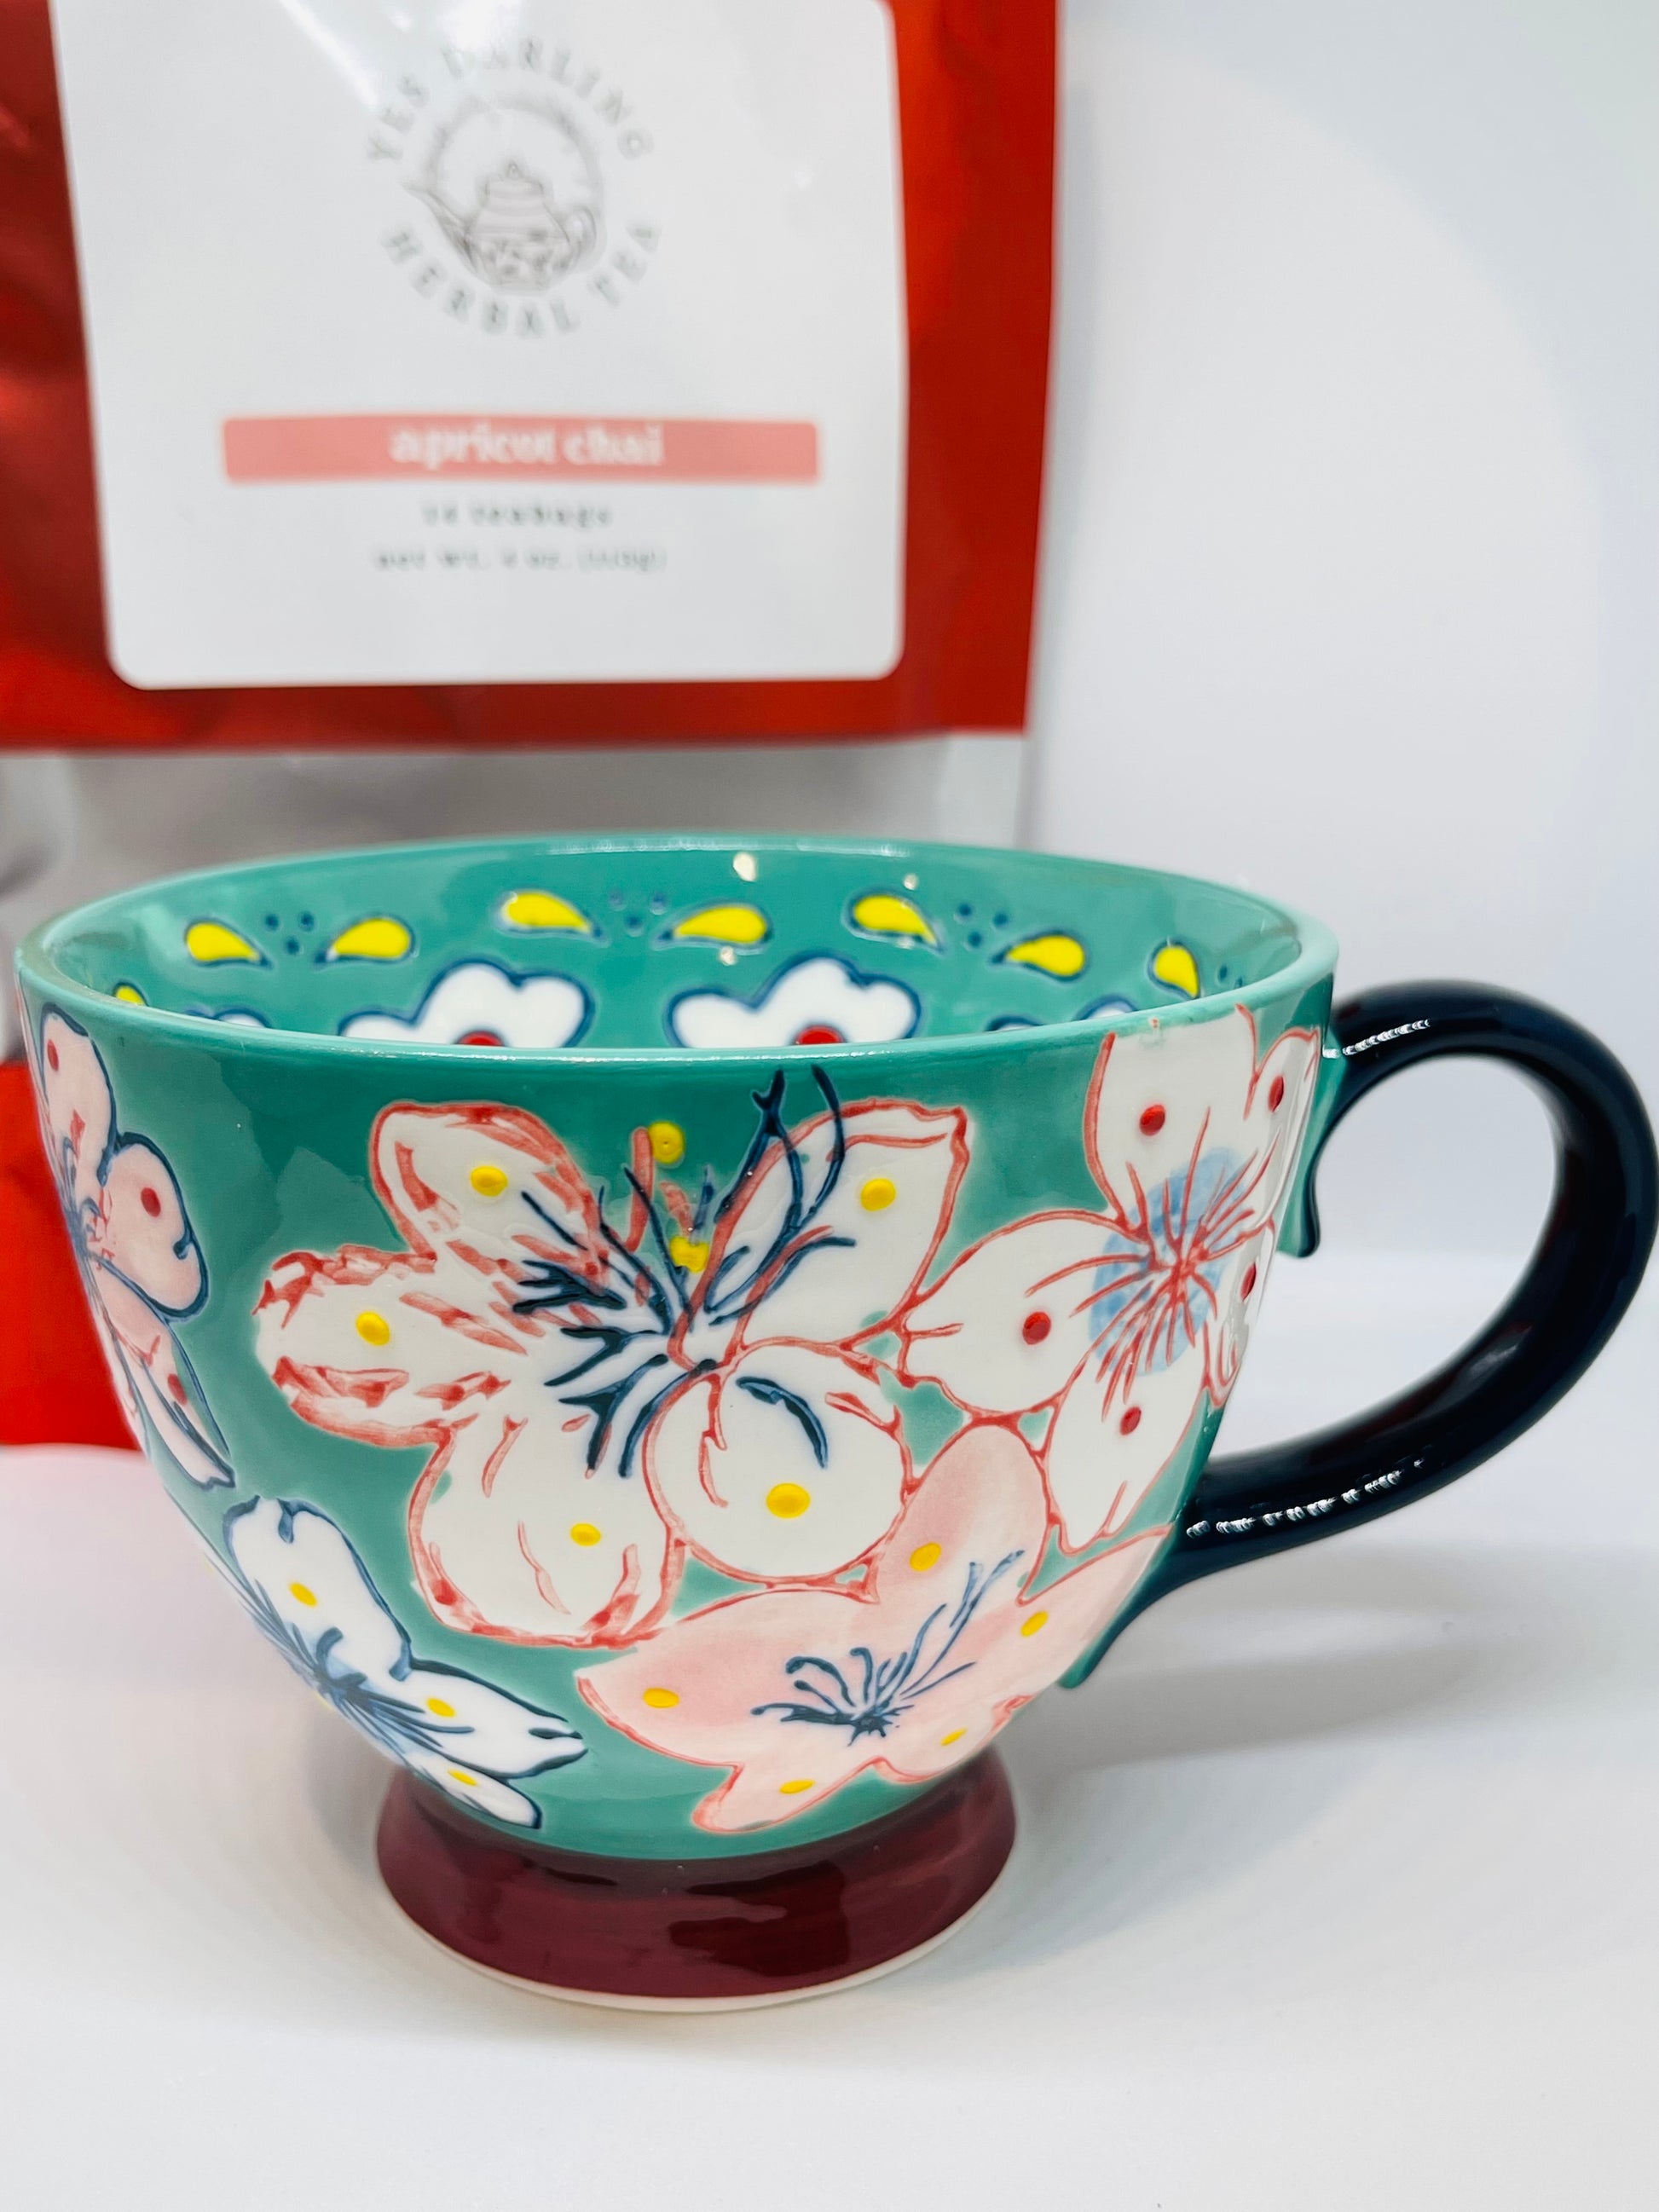 A teal mug with red and navy blue trimmed white, pink, and blue flowers with red and yellow dots, a navy blue handle, and a burgundy base.